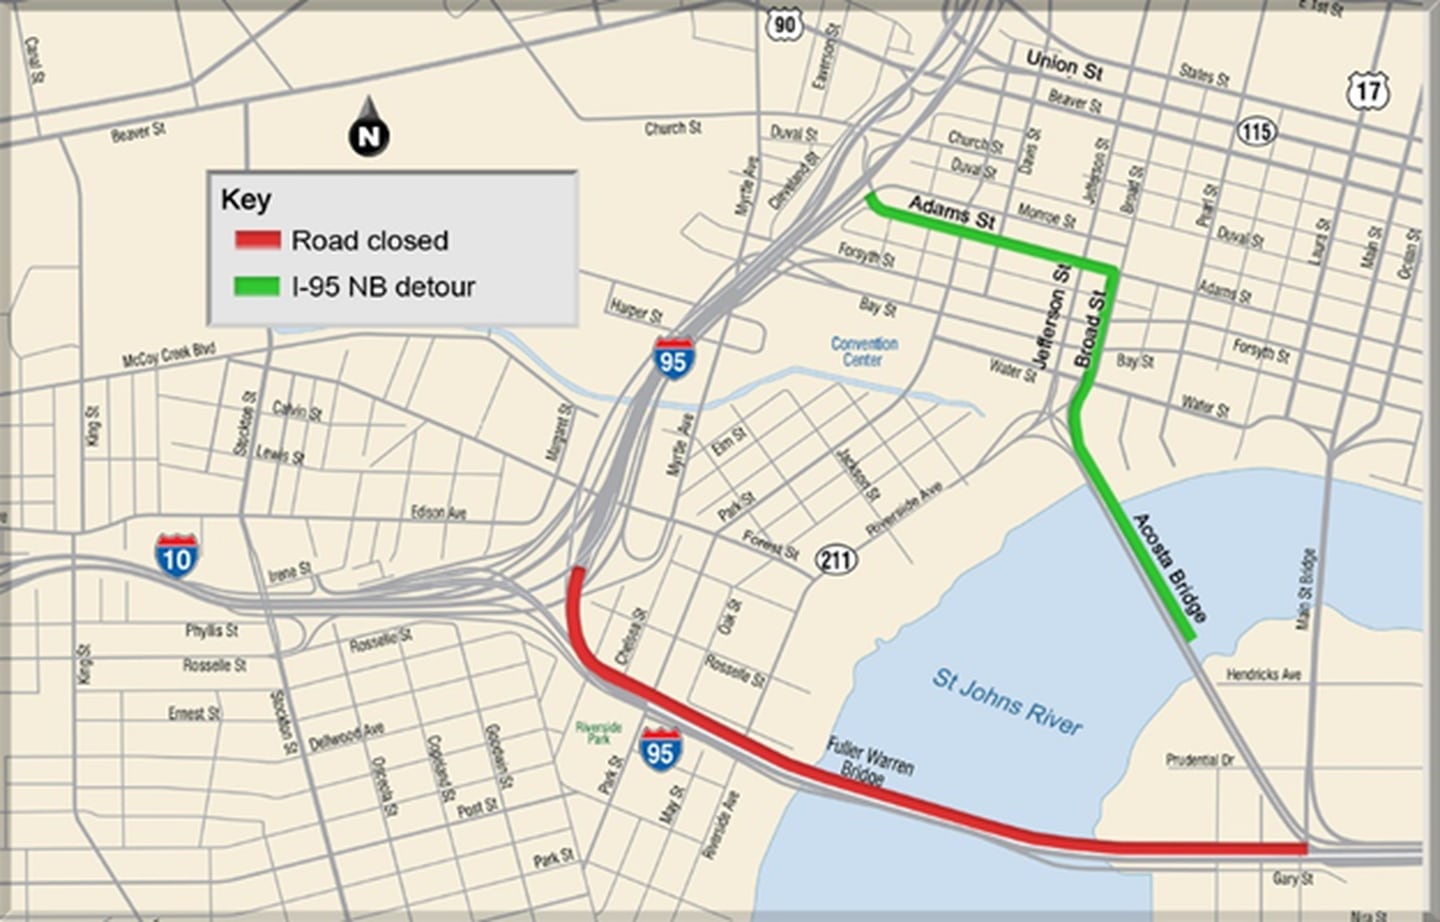 There will be overnight detours of I-95 north Tuesday, Dec. 13 and Wednesday, Dec. 14 from 10 p.m. to 5:30 a.m.